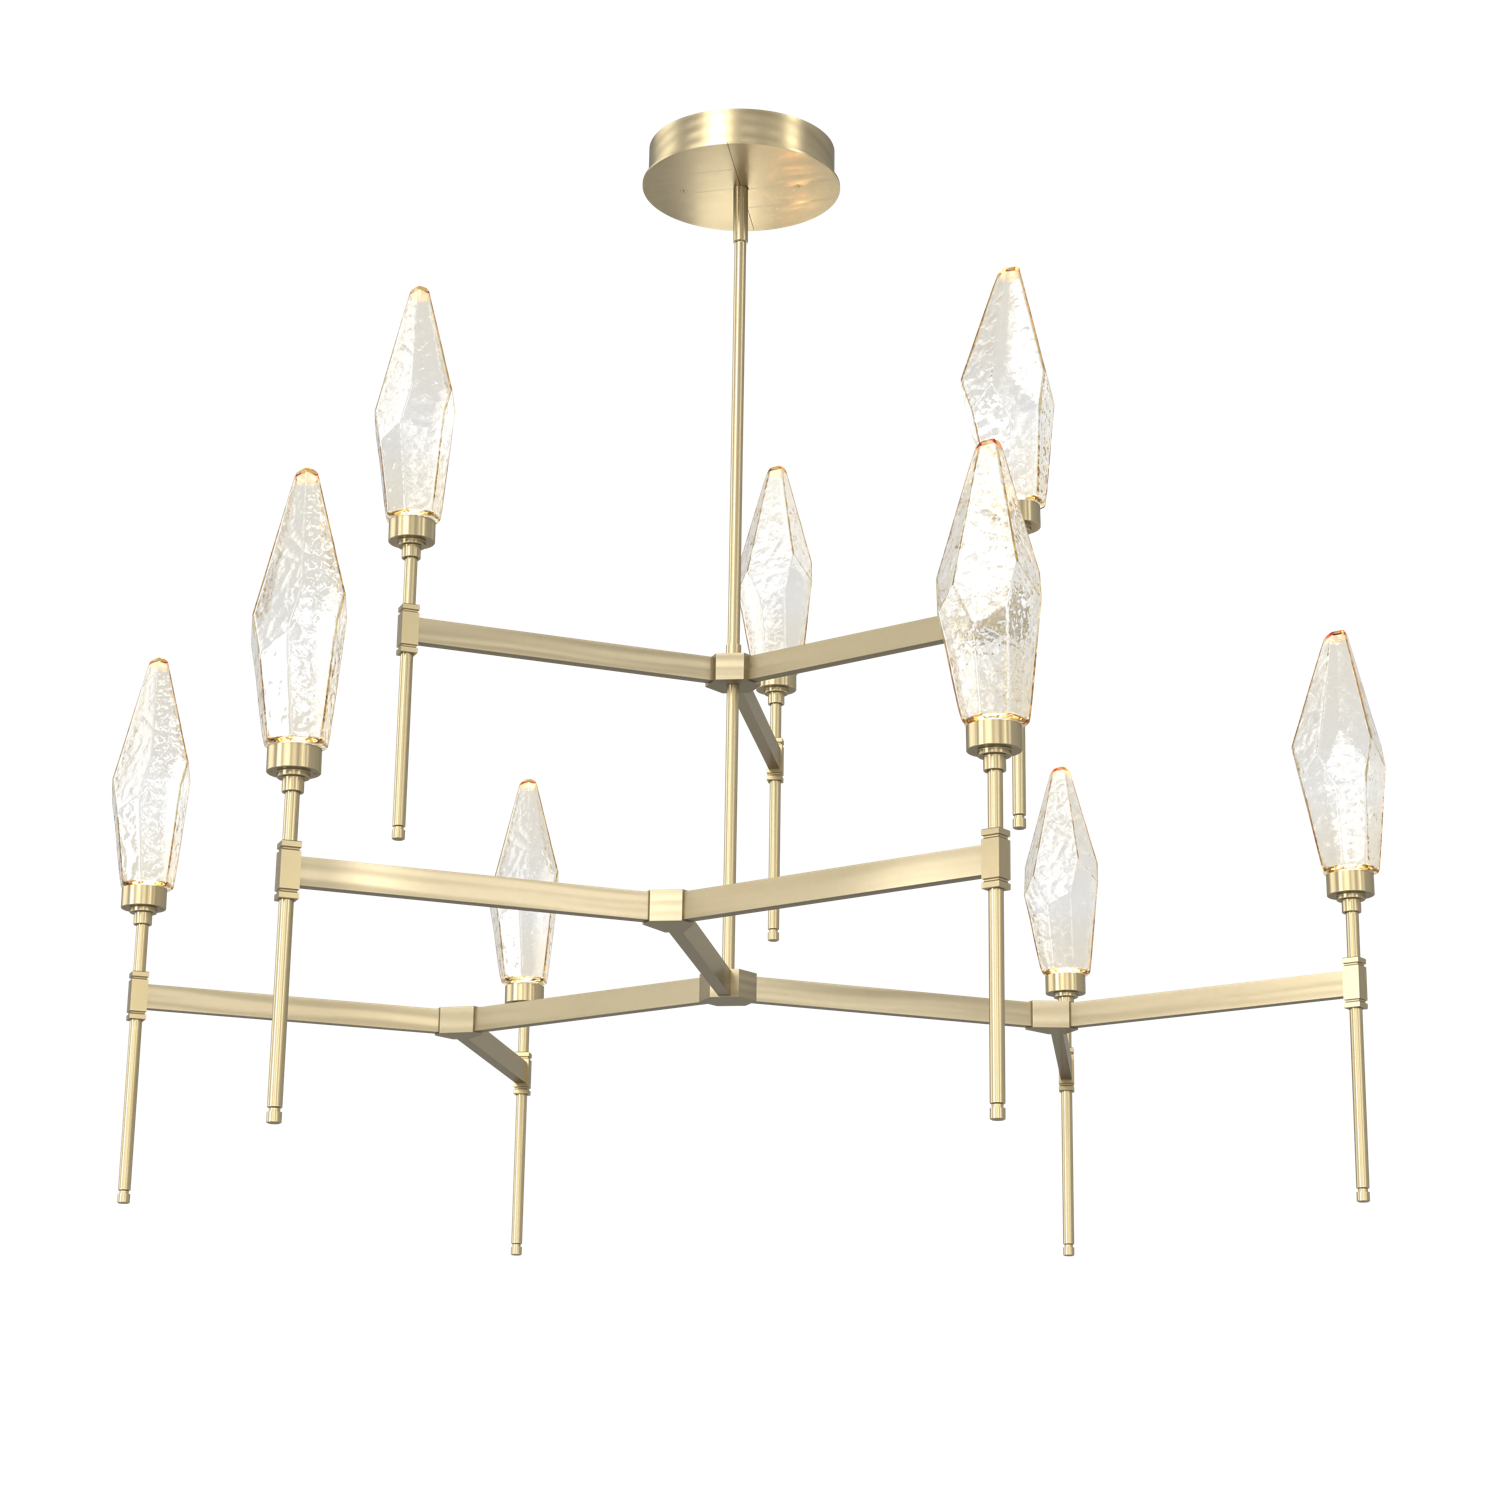 CHB0050-54-HB-CA-Hammerton-Studio-Rock-Crystal-54-inch-round-two-tier-belvedere-chandelier-with-heritage-brass-finish-and-chilled-amber-blown-glass-shades-and-LED-lamping